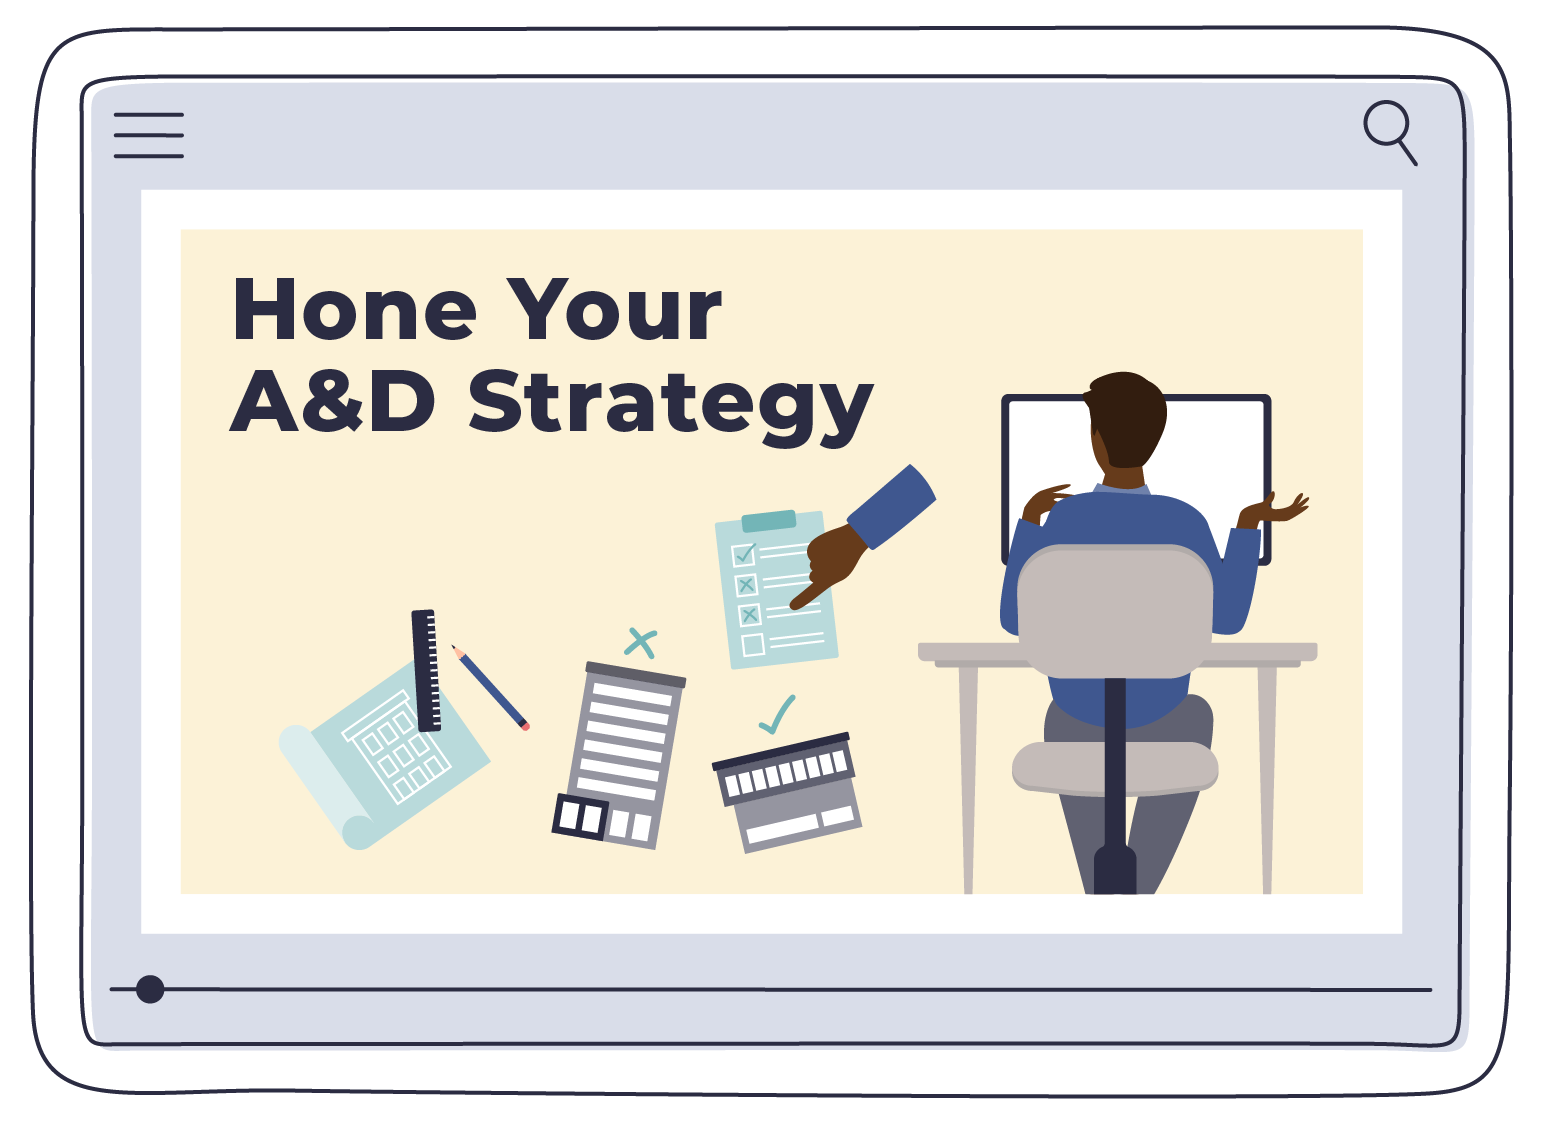 Hone Your A&D Strategy